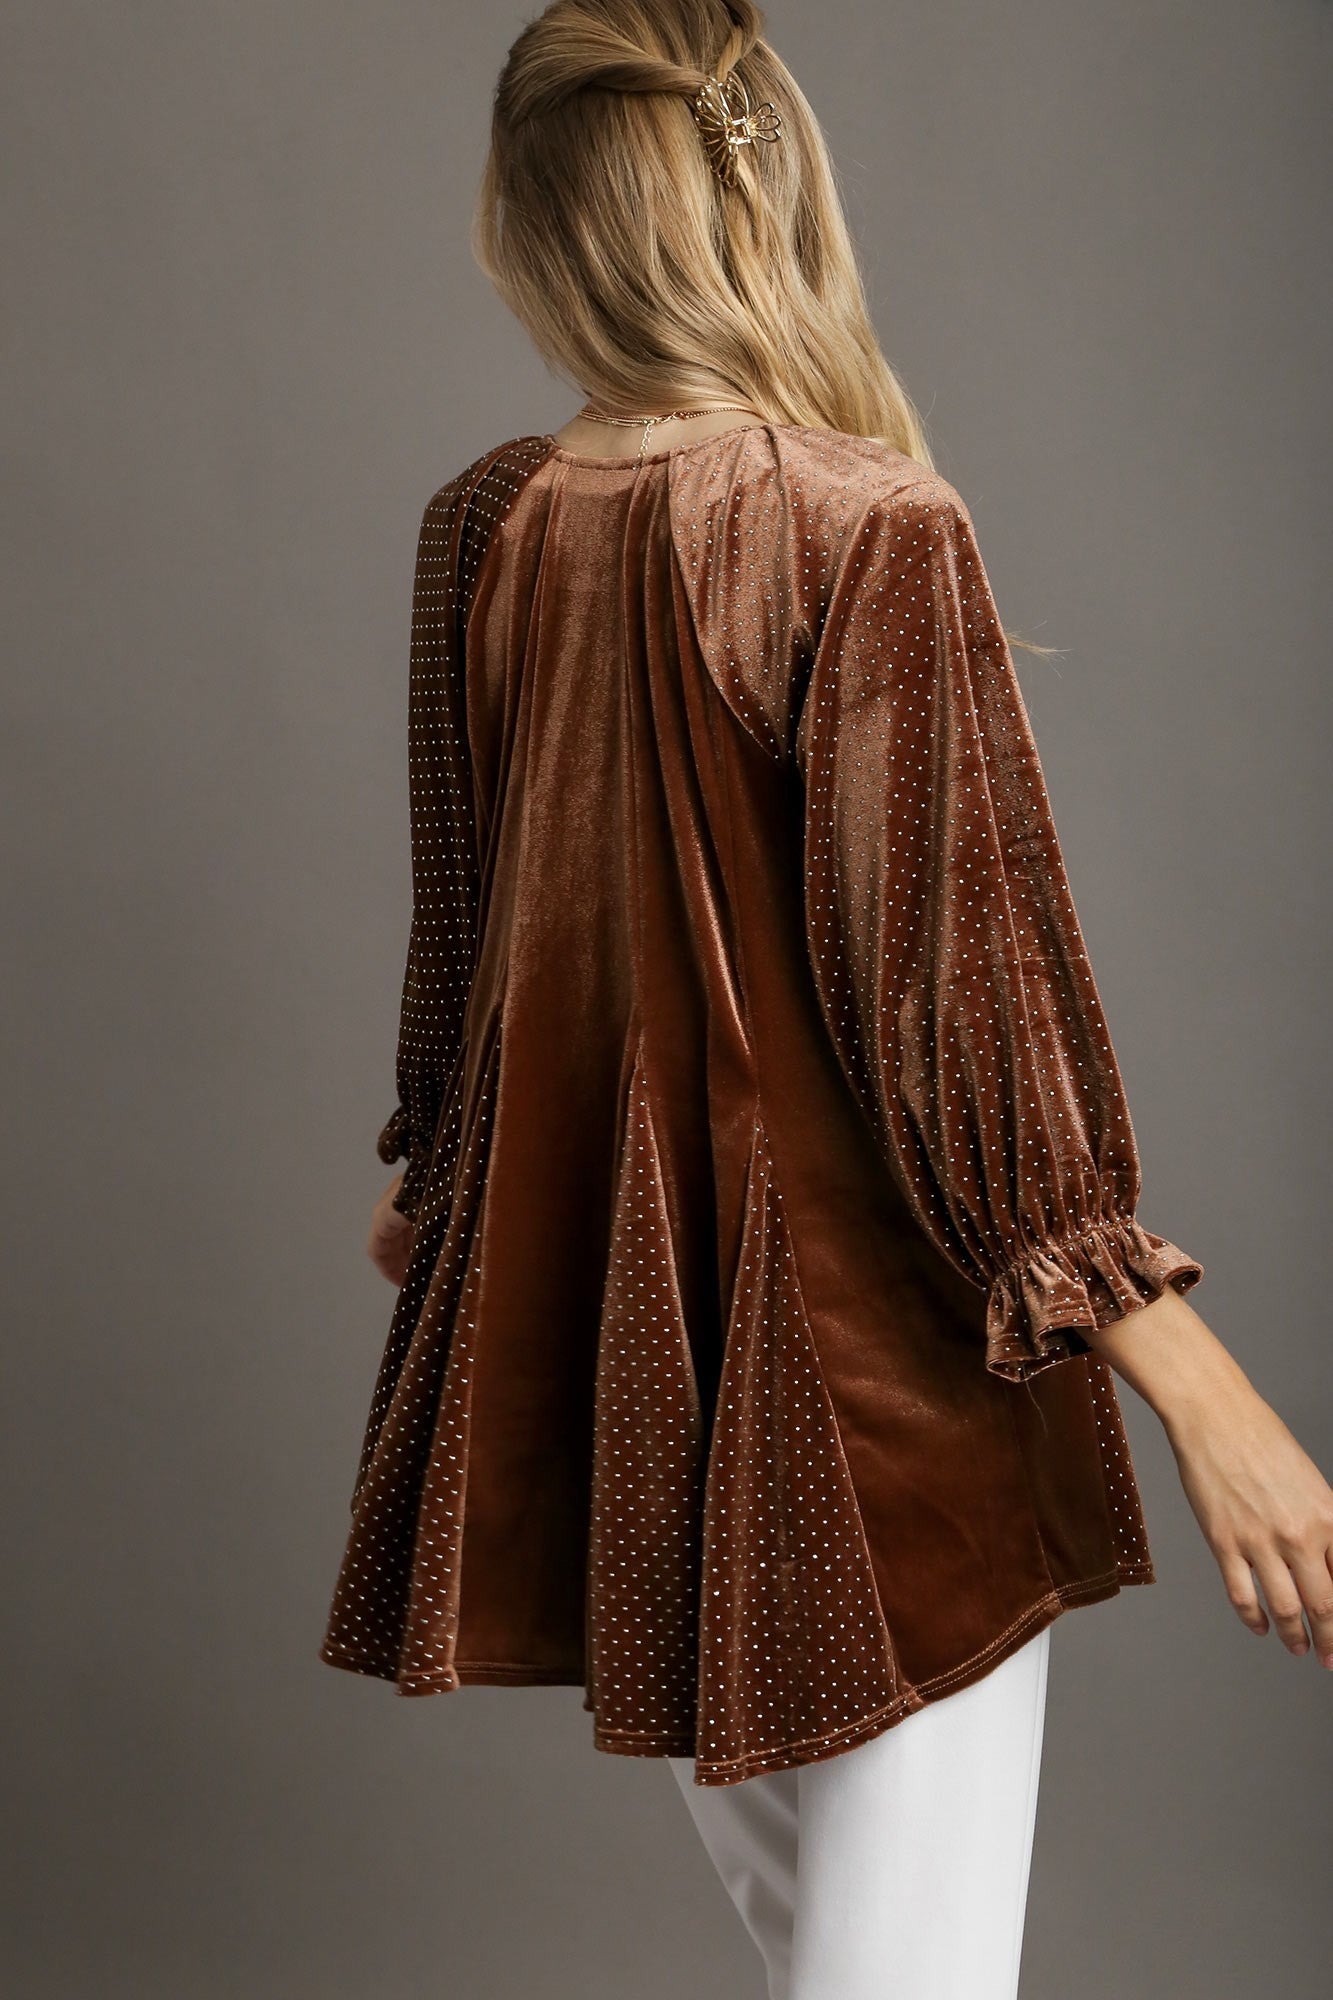 Umgee Velvet Top with Small Stud Details in Brown